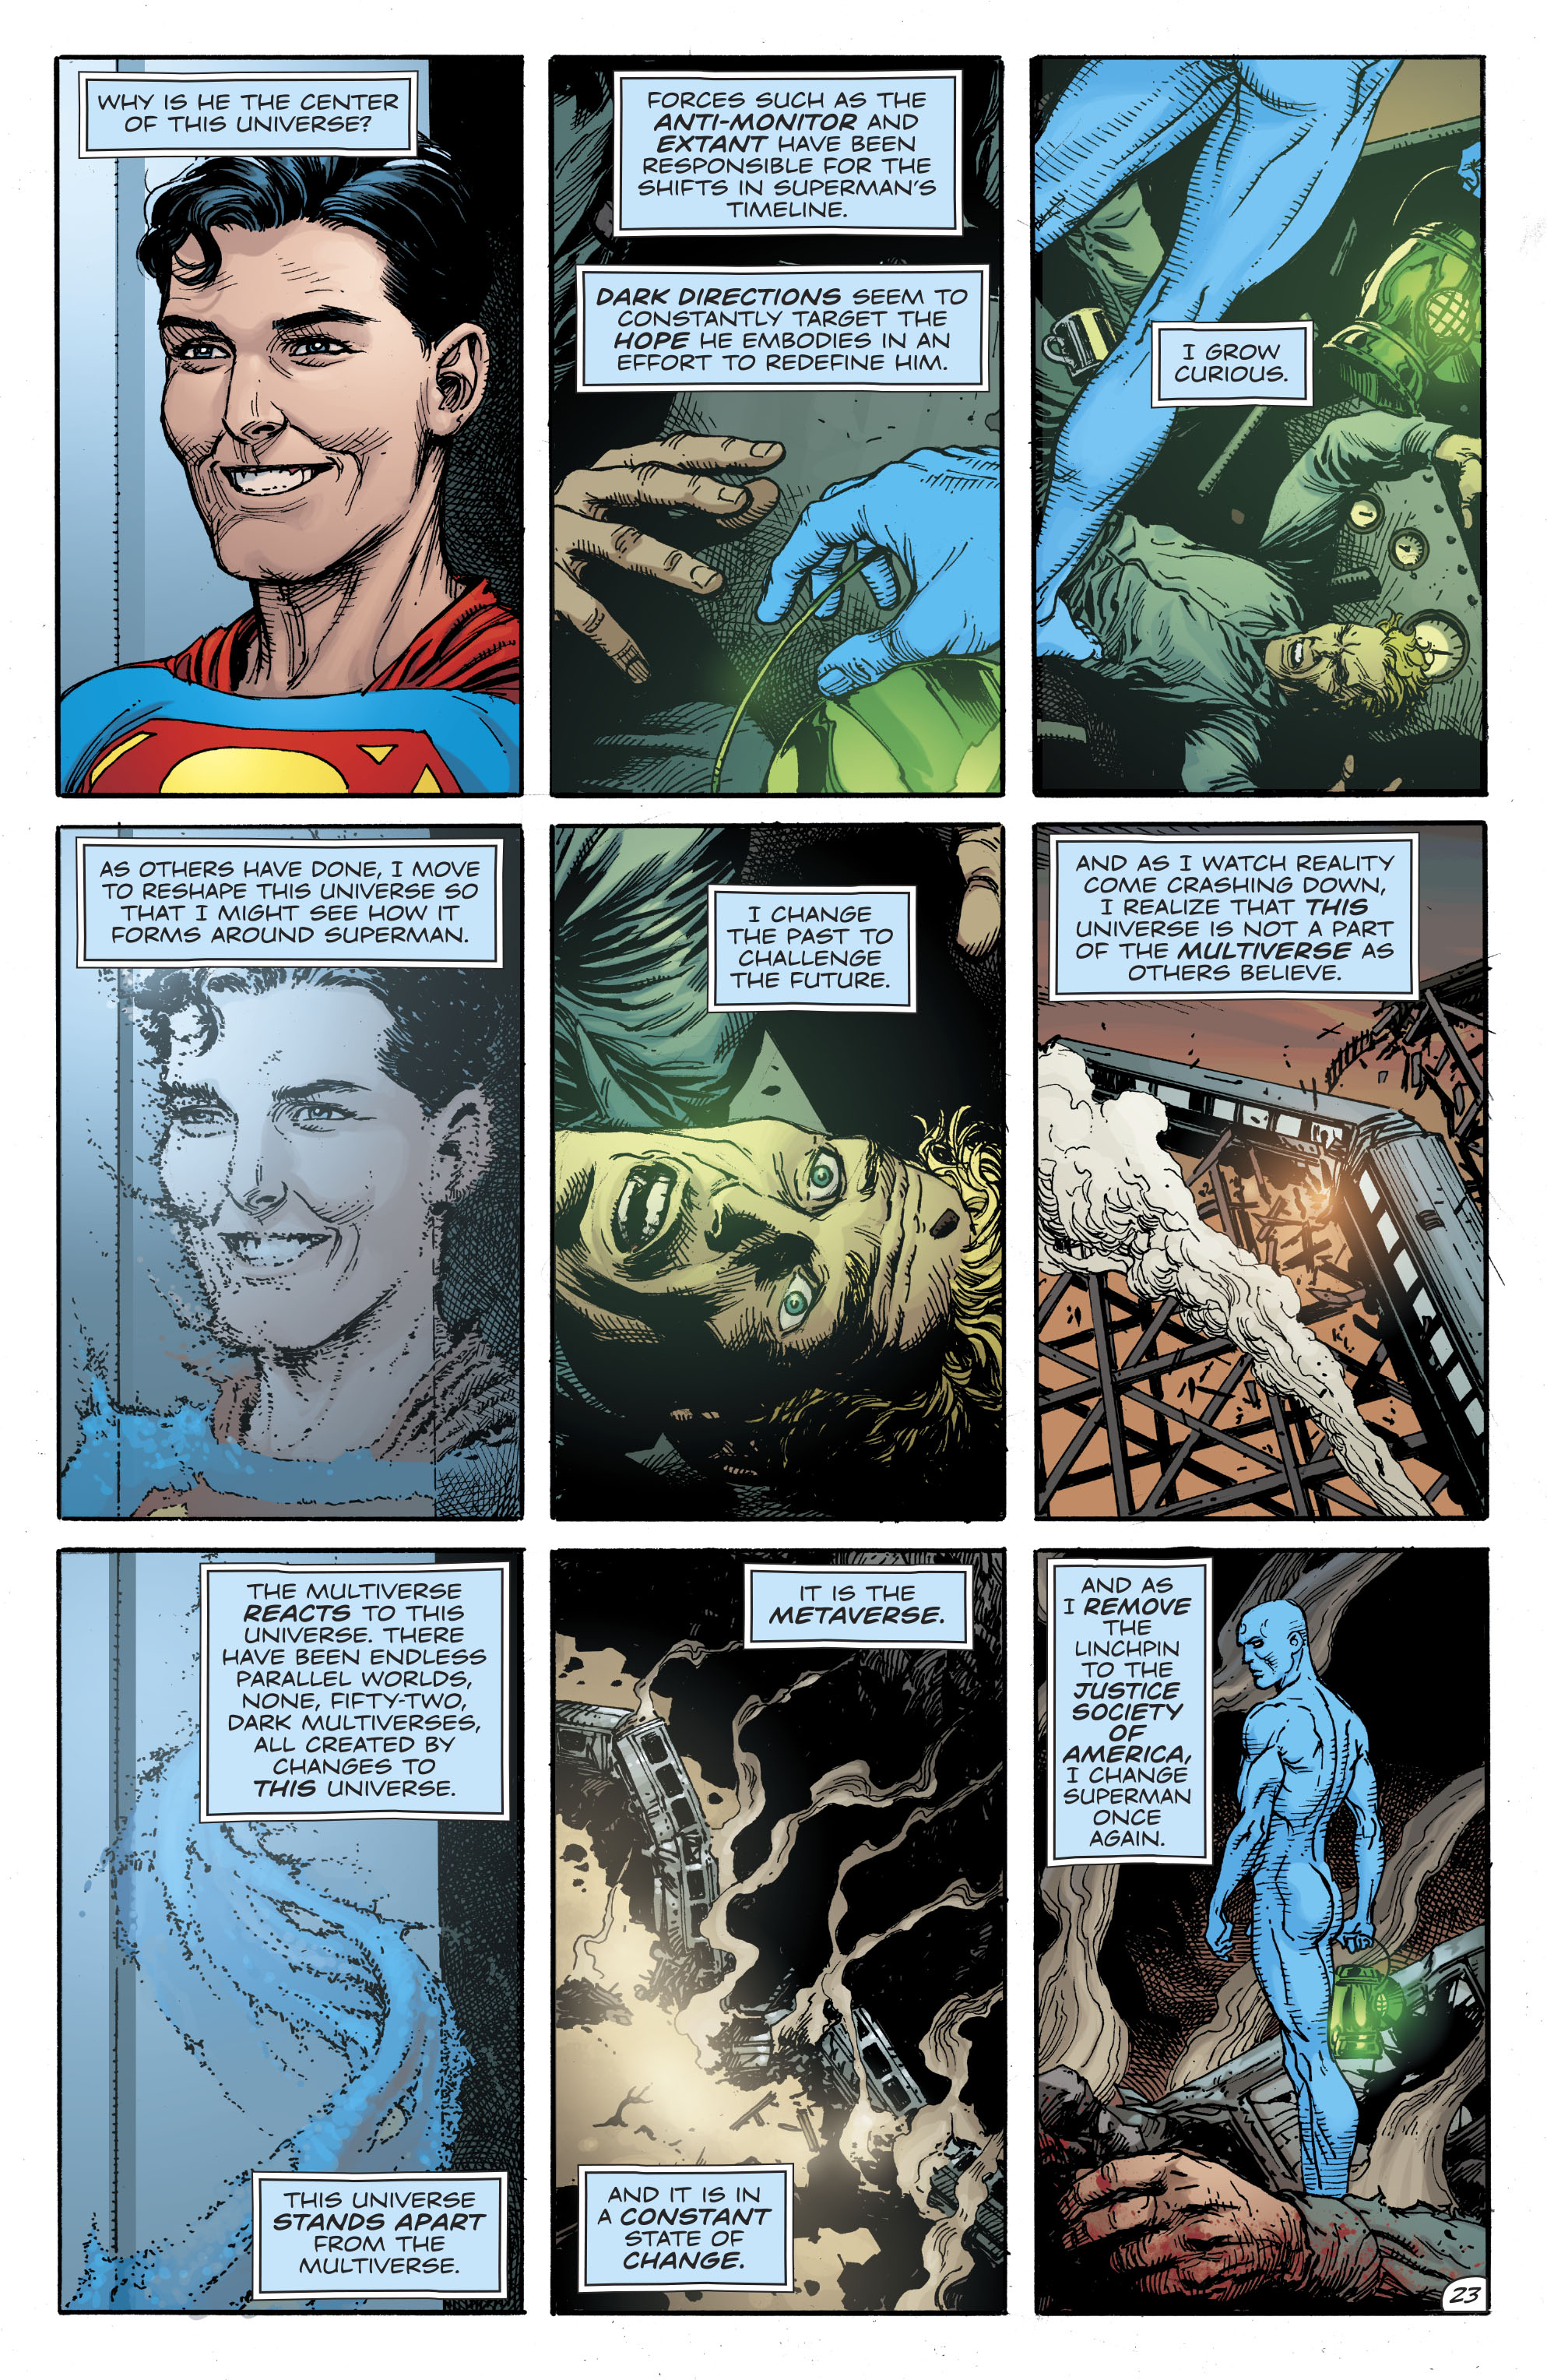 Doomsday Clock #10 - Read Doomsday Clock Issue #10 Online | Full Page1987 x 3056